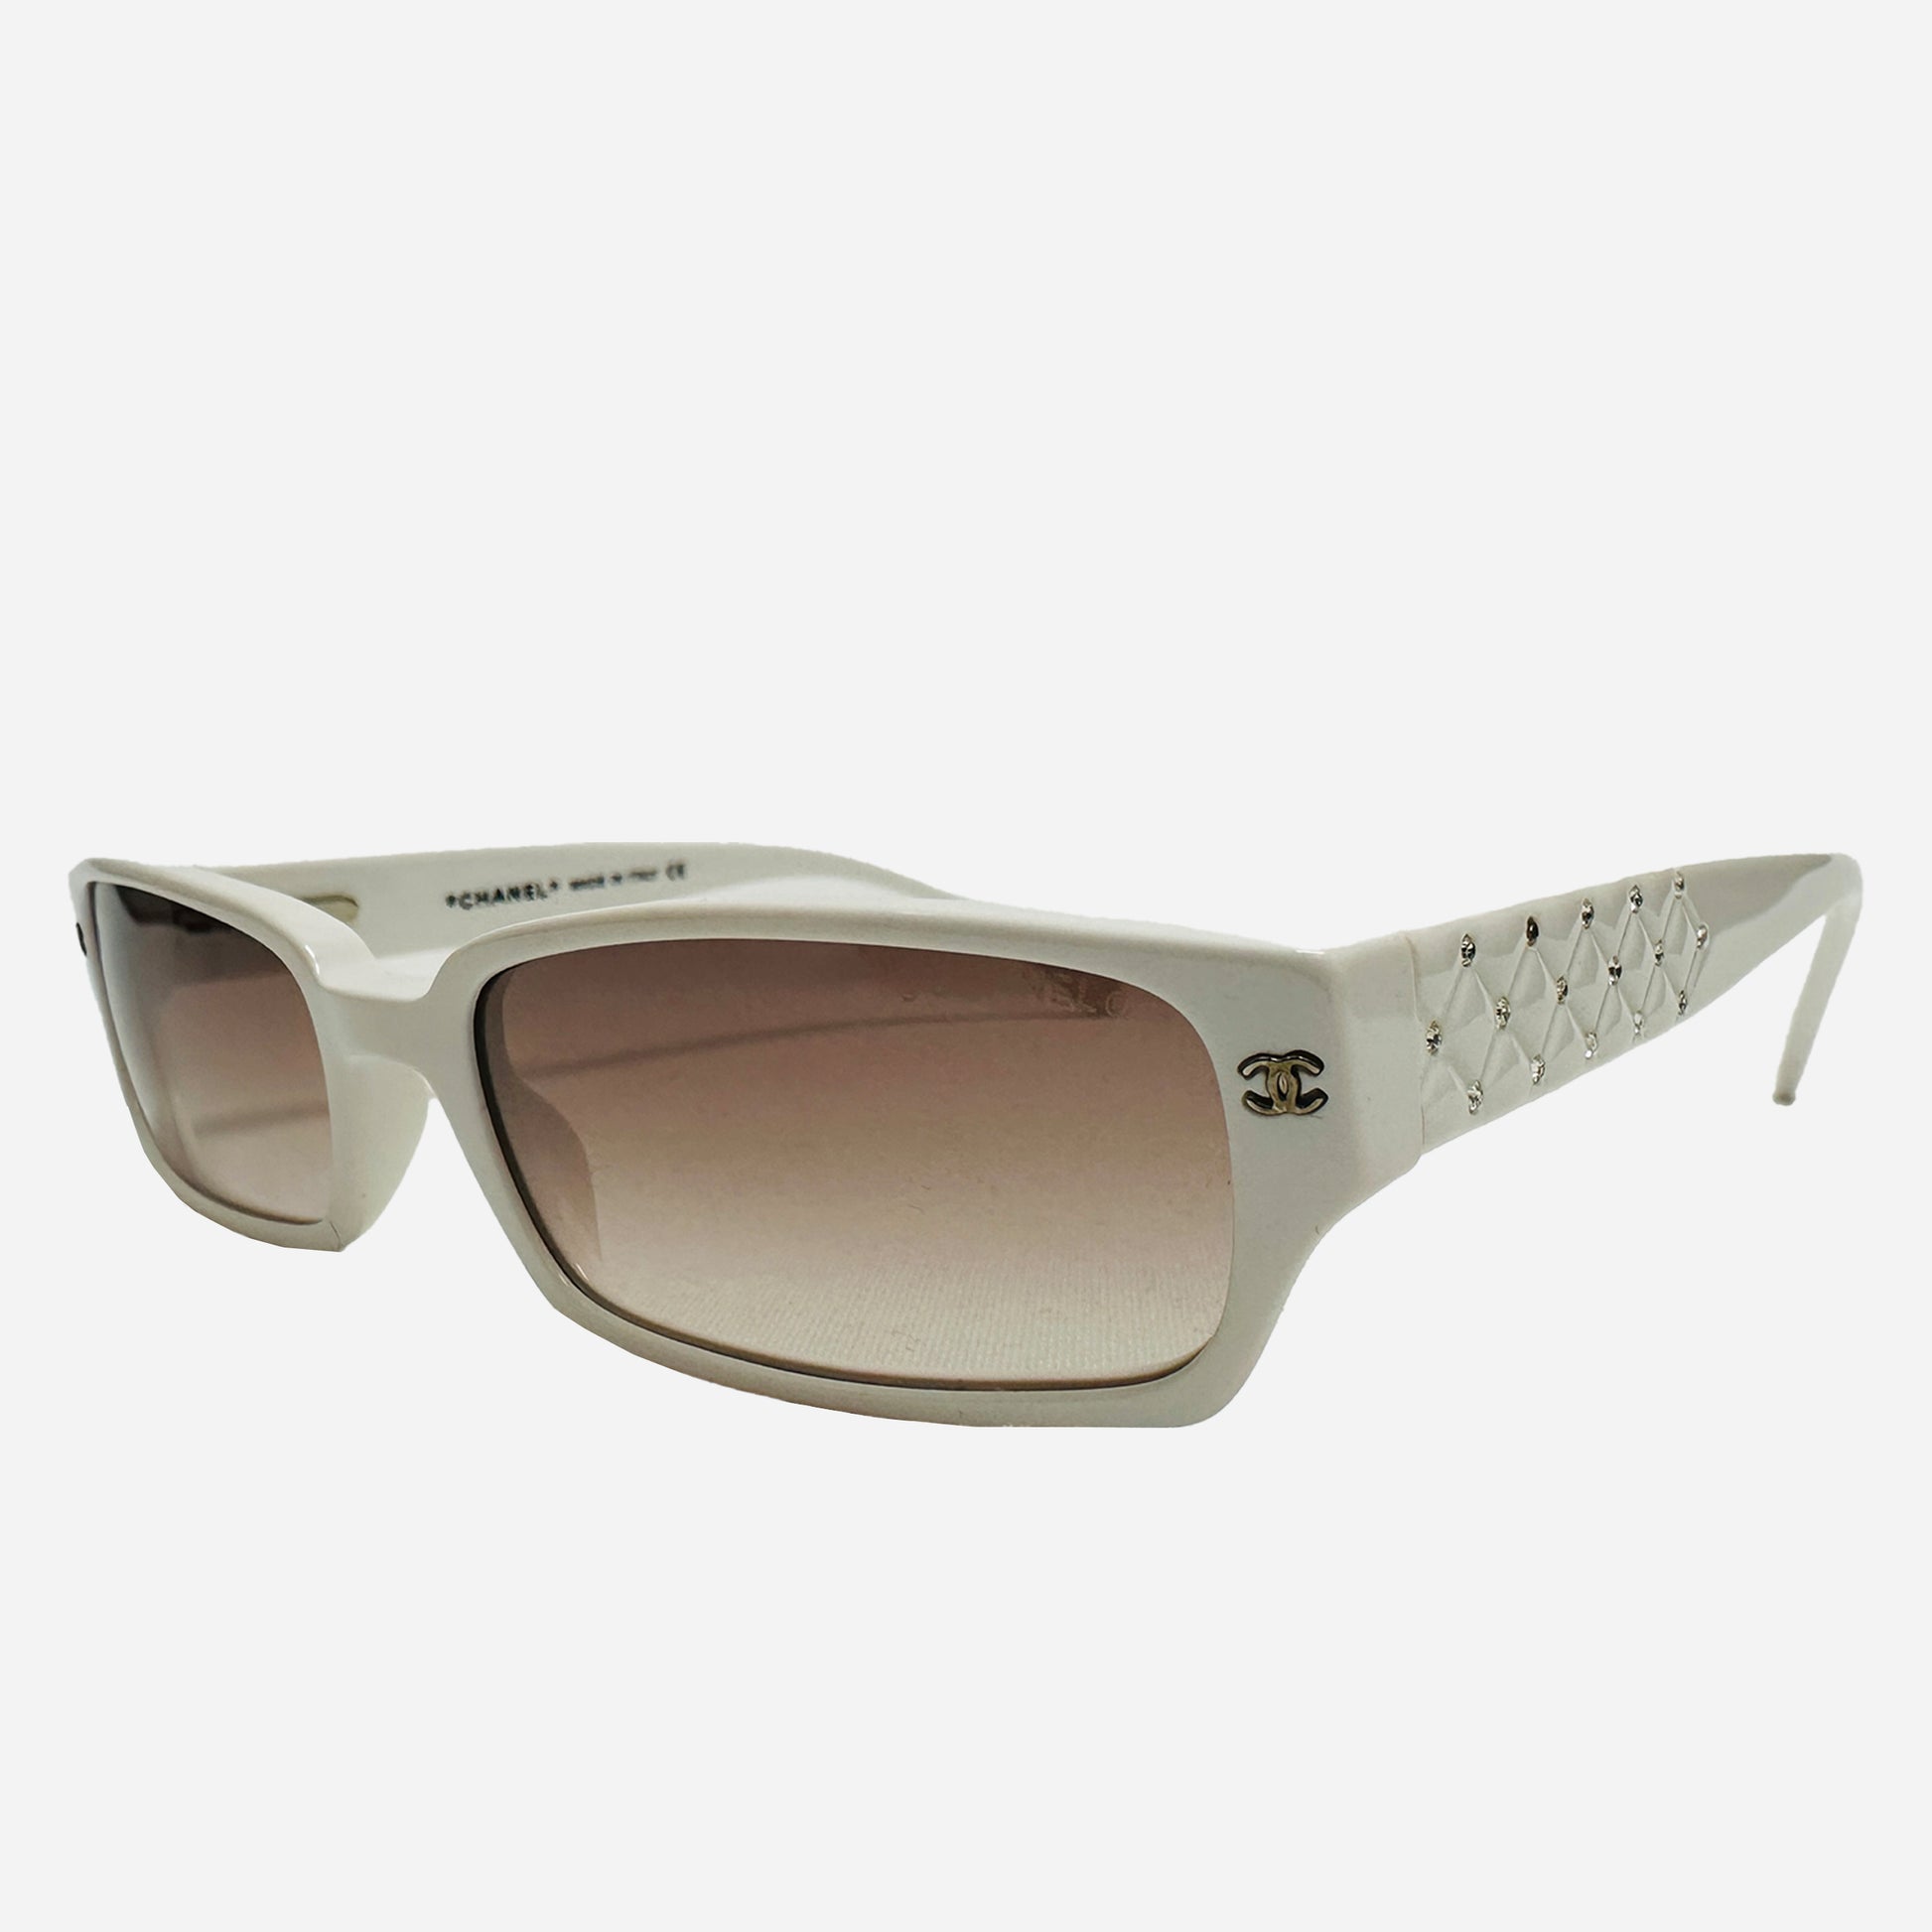 The-Seekers-Vintage-Coco-Chanel-Sunglasses-Sonnenbrille-5058-side-front